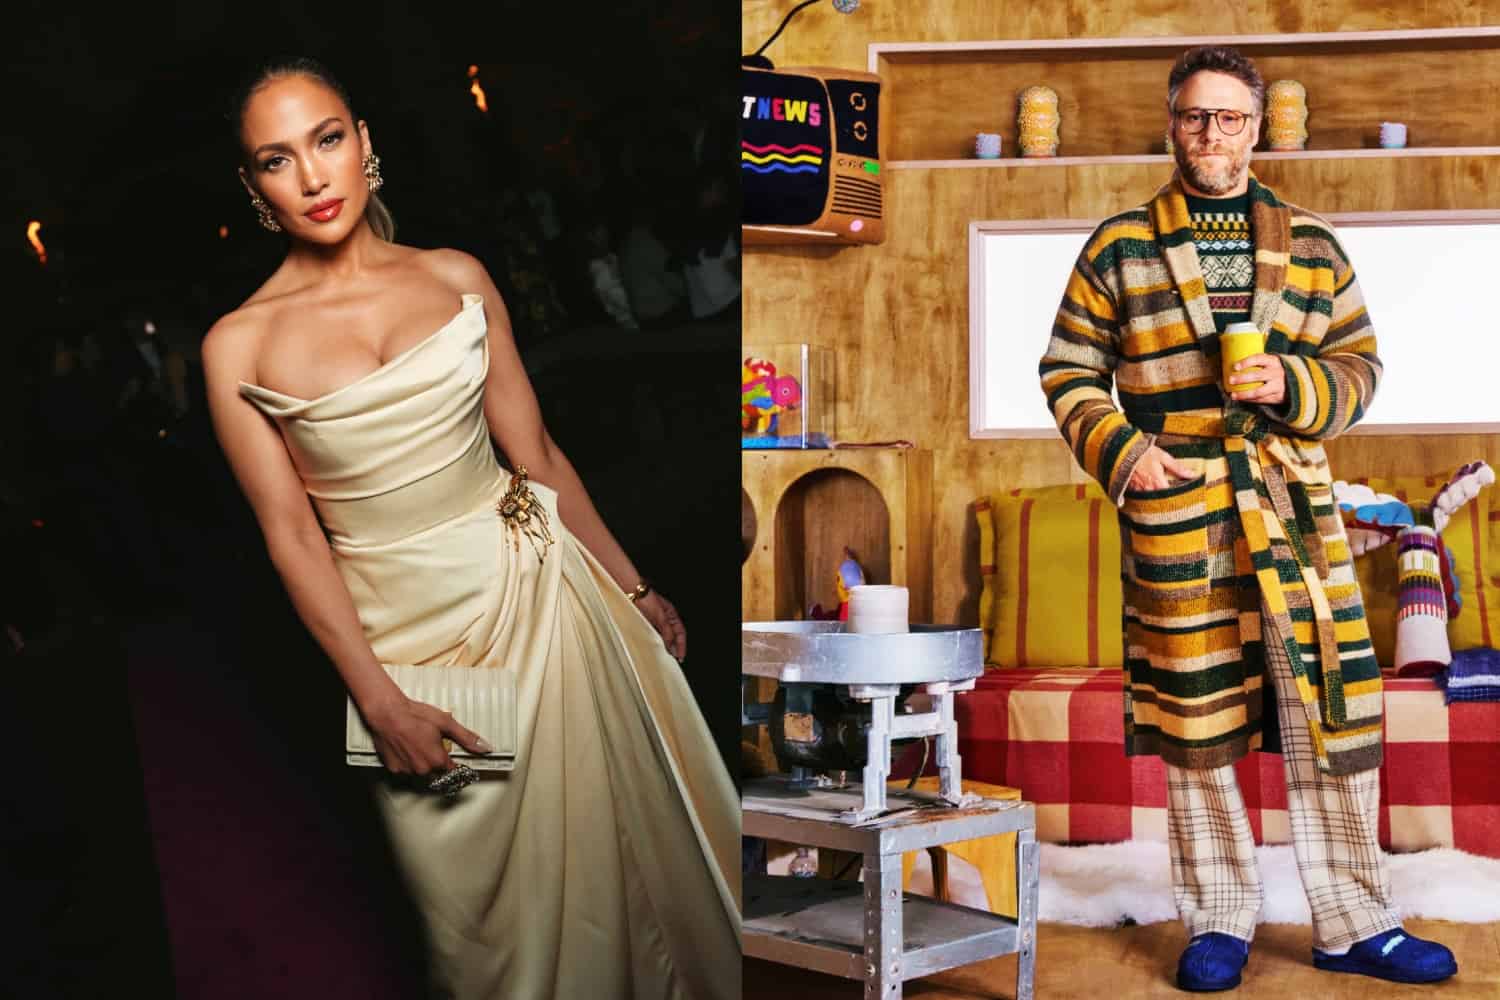 Daily News: Gucci To Return To MFW, Daniel Roseberry Chats To Carine  Roitfeld & Adrian Cheng, Bella Hadid & Kendall Jenner's Bridesmaid Outing,  And More! - Daily Front Row